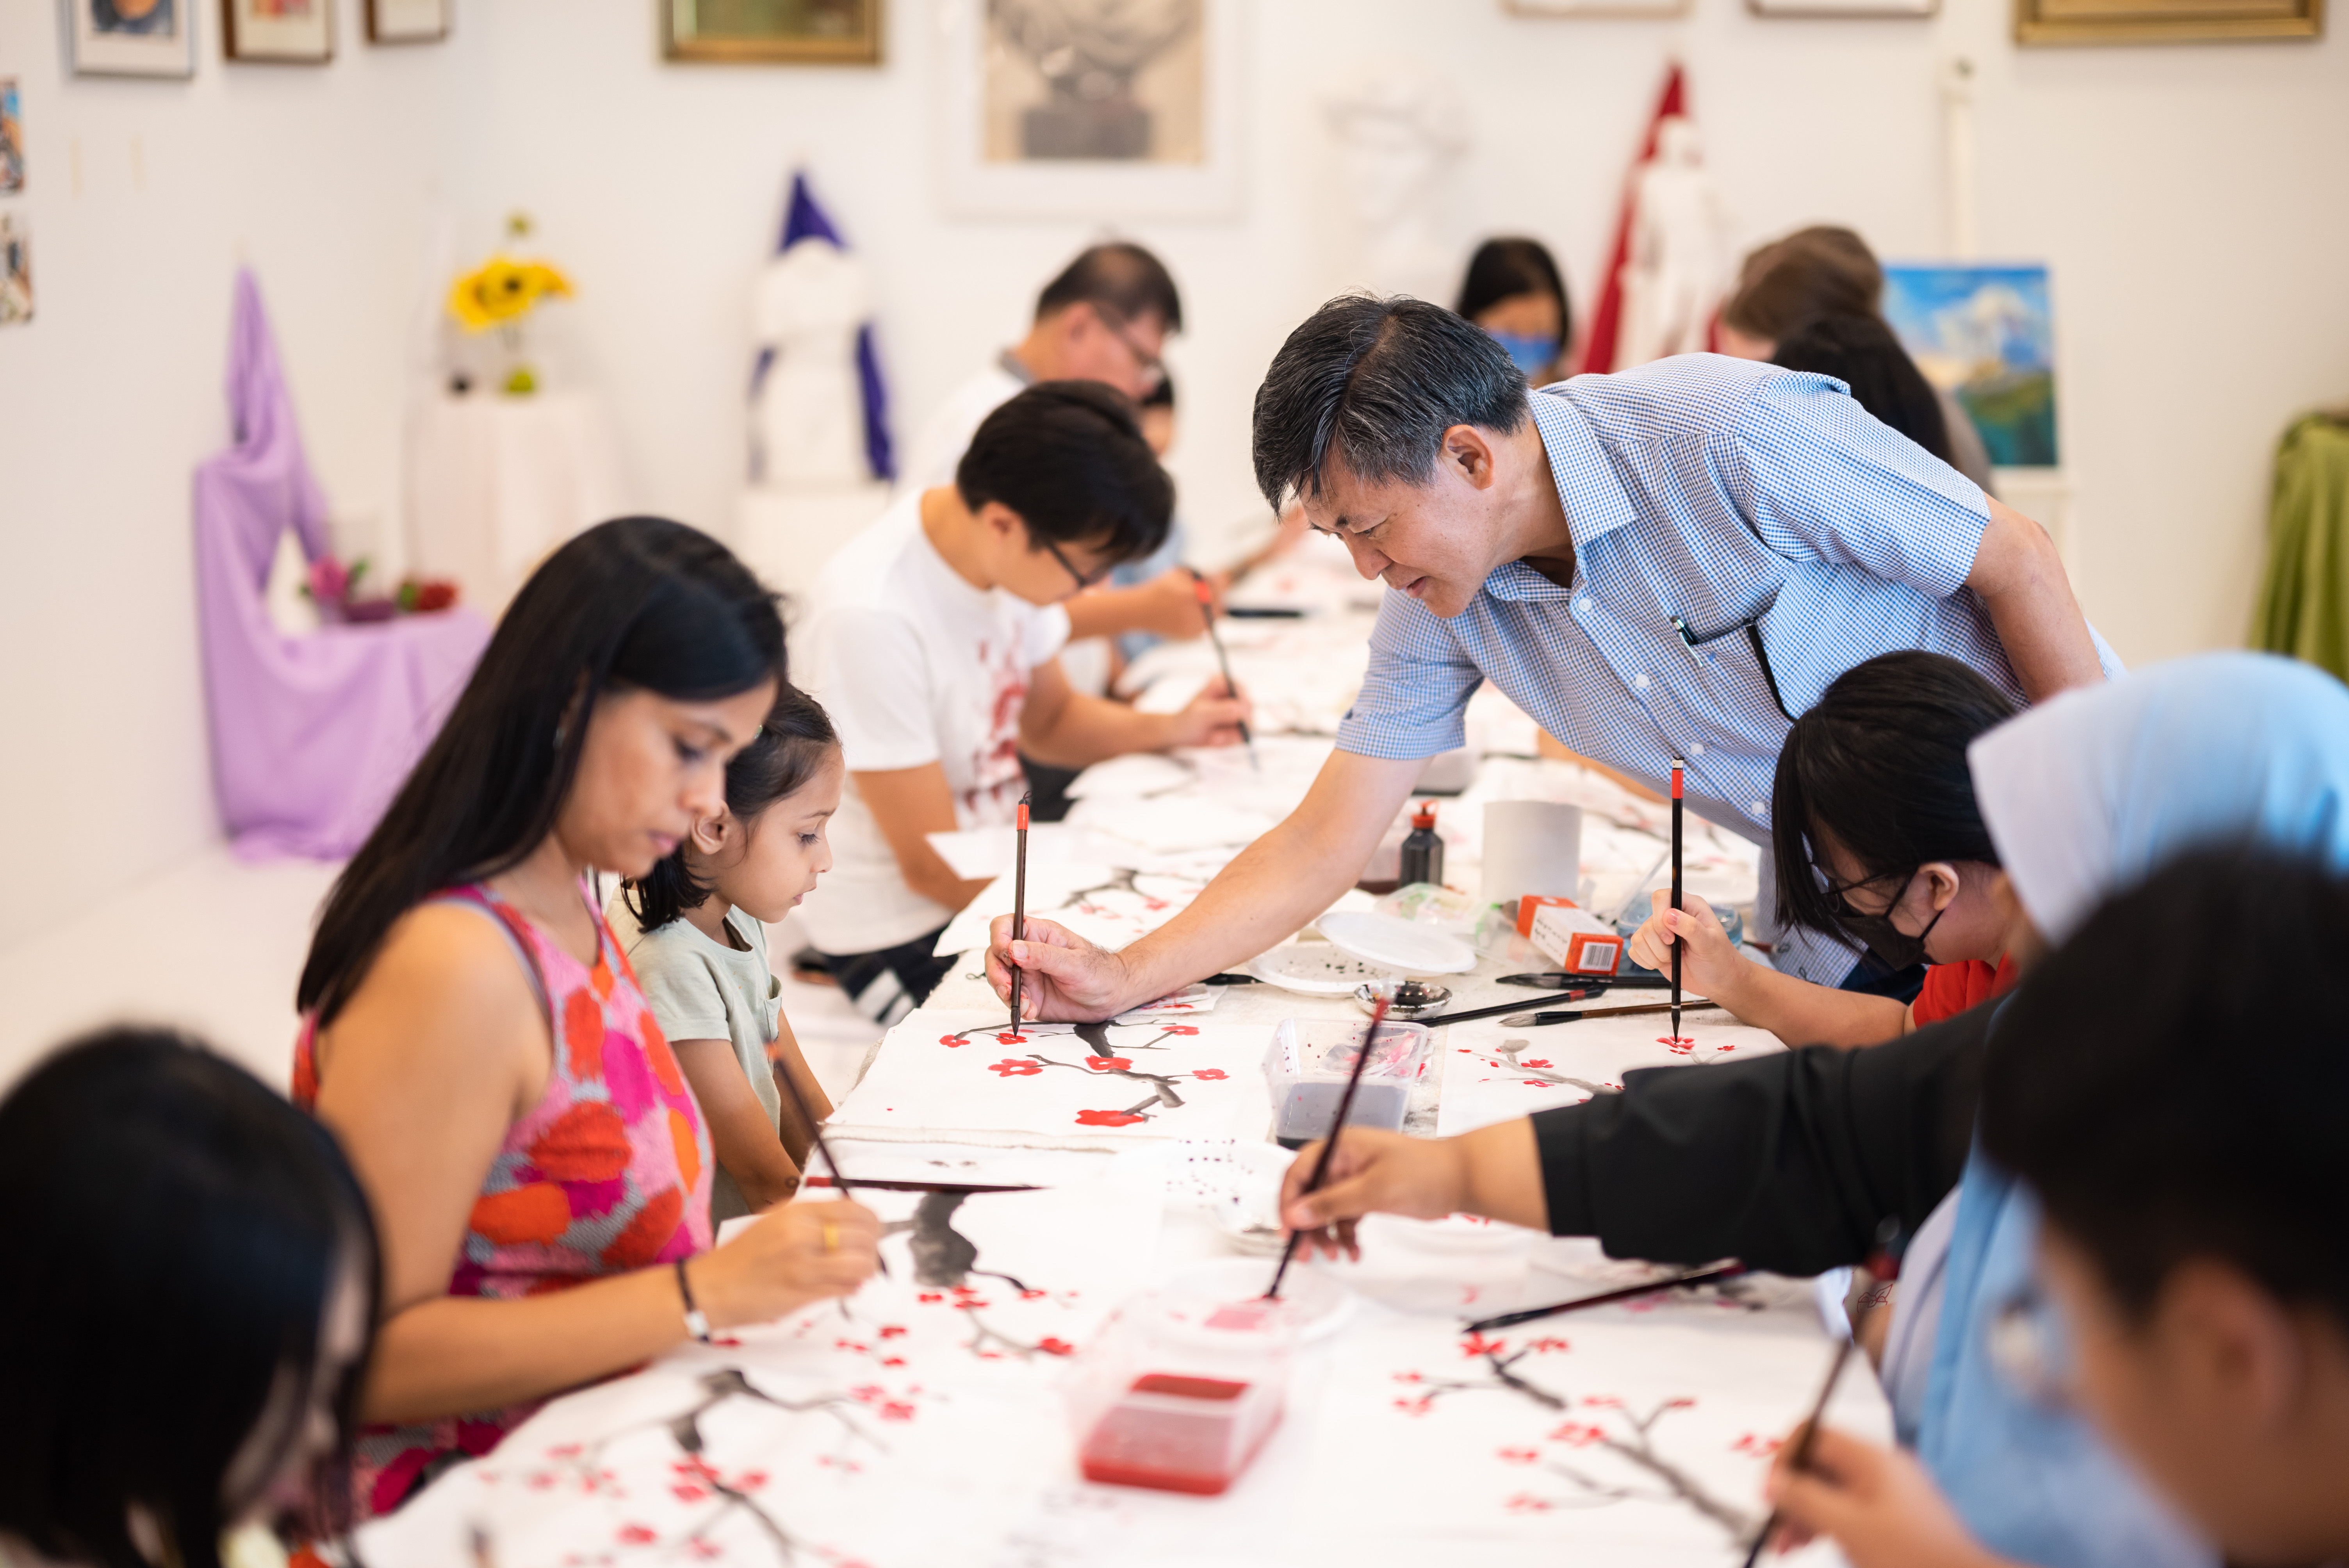 Wide shot of people painting at an arts workshop